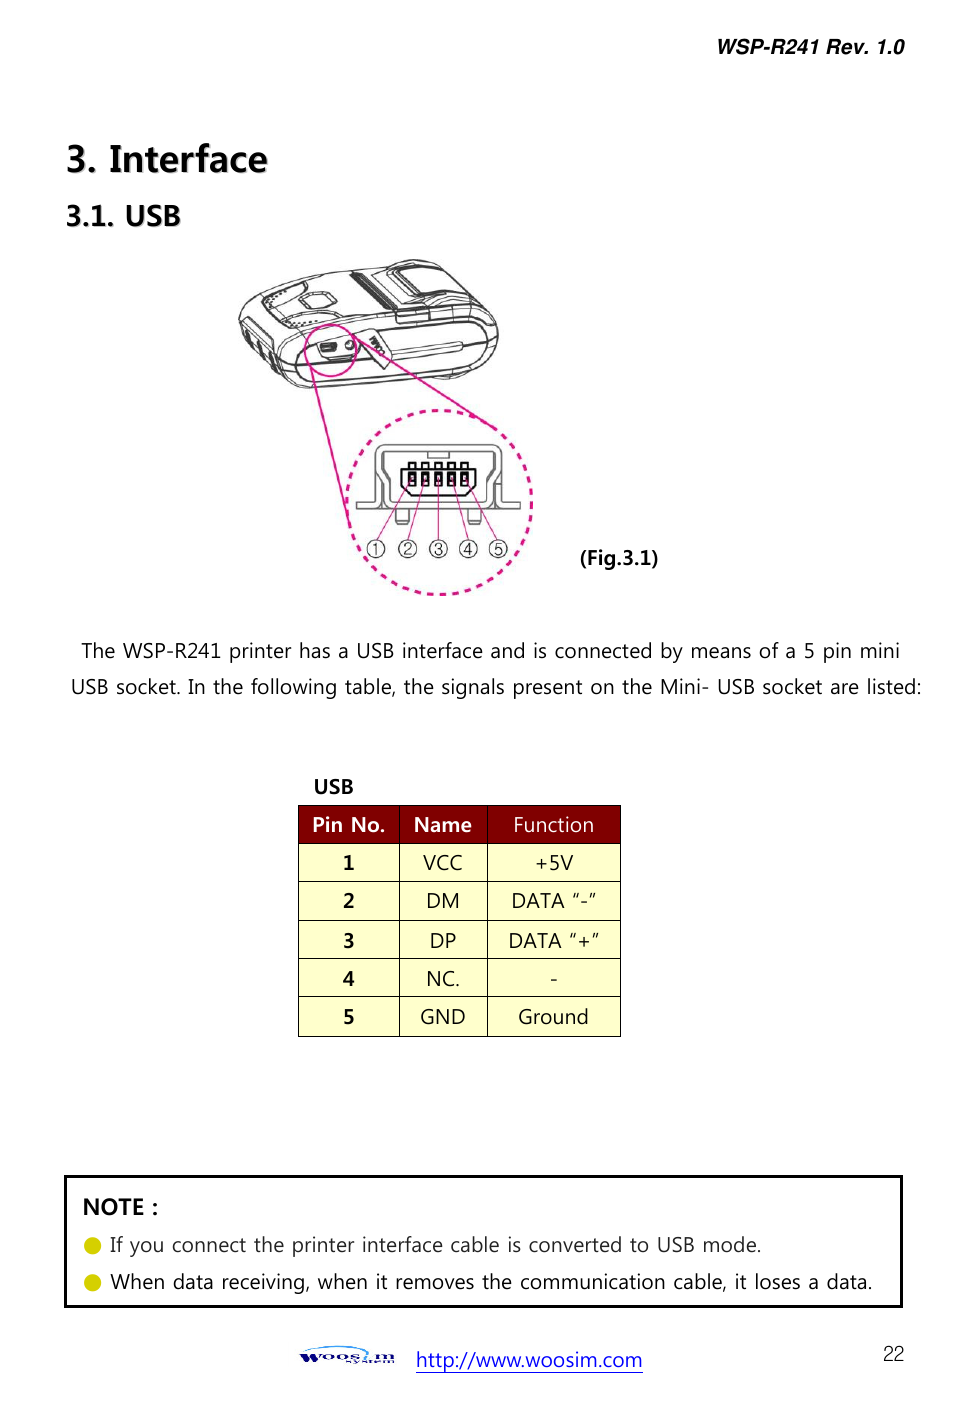 WSP-R241 Rev. 1.0    http://www.woosim.com 22 33..  IInntteerrffaaccee  33..11..  UUSSBB                                         The WSP-R241 printer has a USB interface and is connected by means of a 5 pin mini USB socket. In the following table, the signals present on the Mini- USB socket are listed:                     NOTE : ● If you connect the printer interface cable is converted to USB mode. ● When data receiving, when it removes the communication cable, it loses a data.  (Fig.3.1)   USB Pin No. Name Function 1 VCC +5V 2 DM DATA “-” 3 DP DATA “+” 4 NC. - 5 GND Ground  